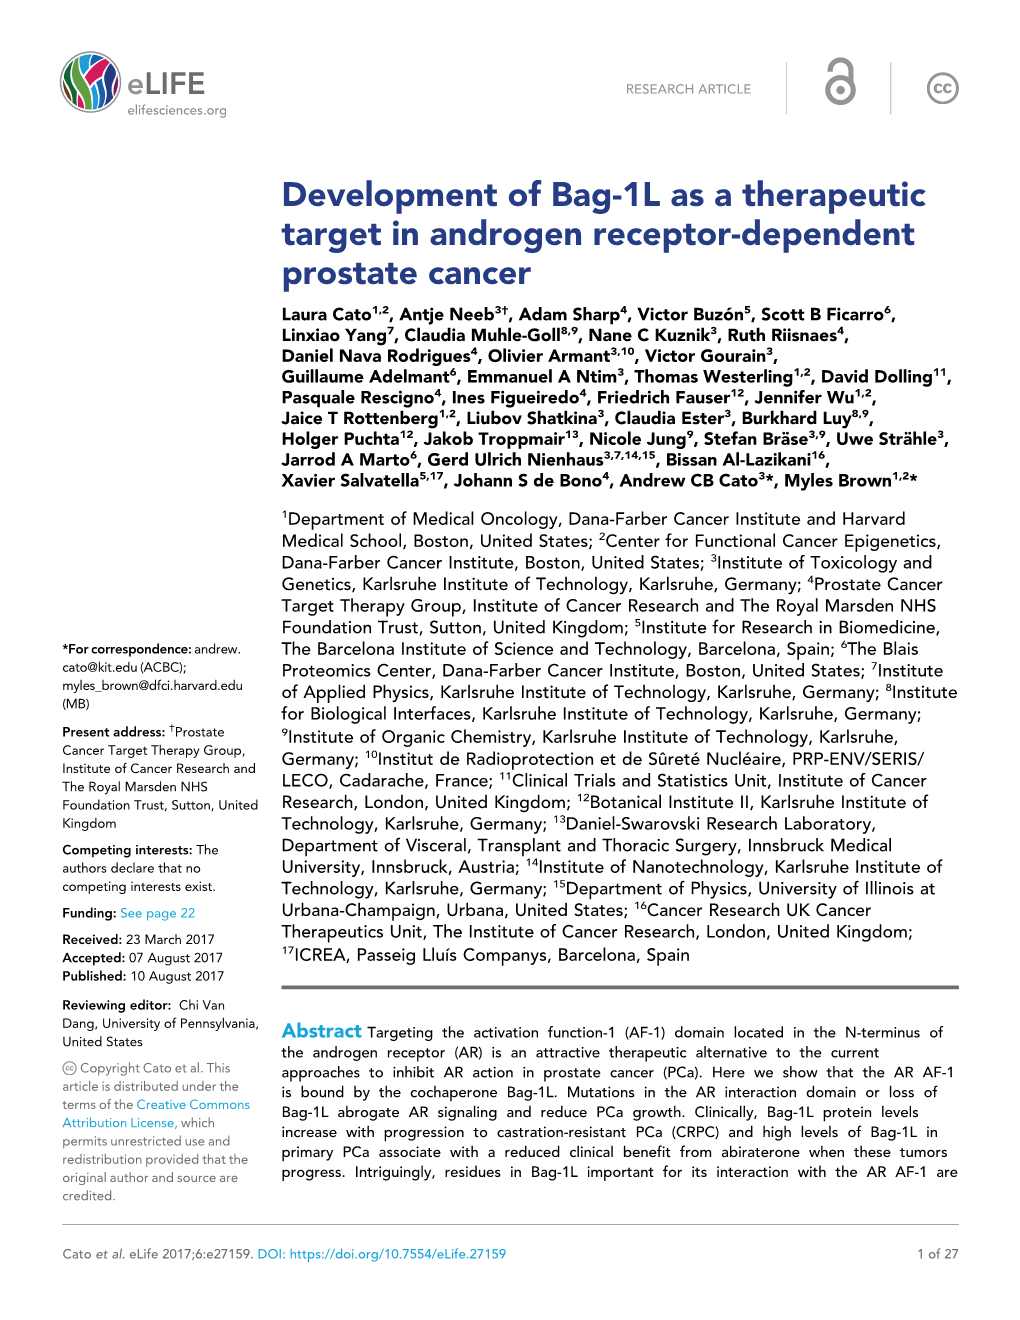 Development of Bag-1L As a Therapeutic Target in Androgen Receptor-Dependent Prostate Cancer